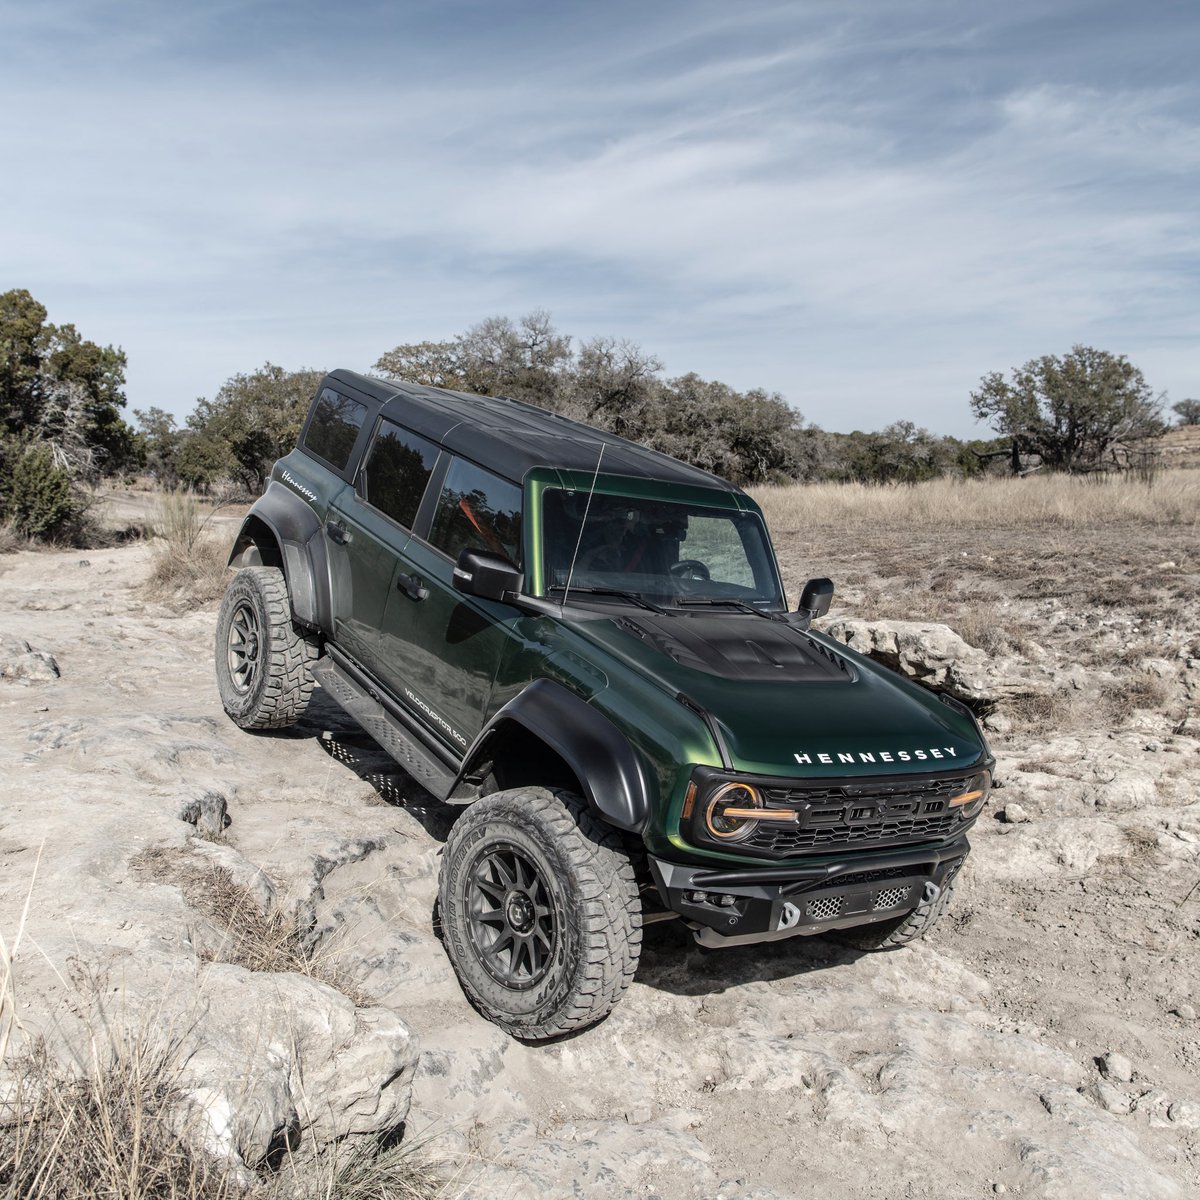 Out of Office ✌️

@Ford #Ford #HennesseyPerformance #EruptionGreen #Bronco #OffRoad #BroncoRaptor #4X4